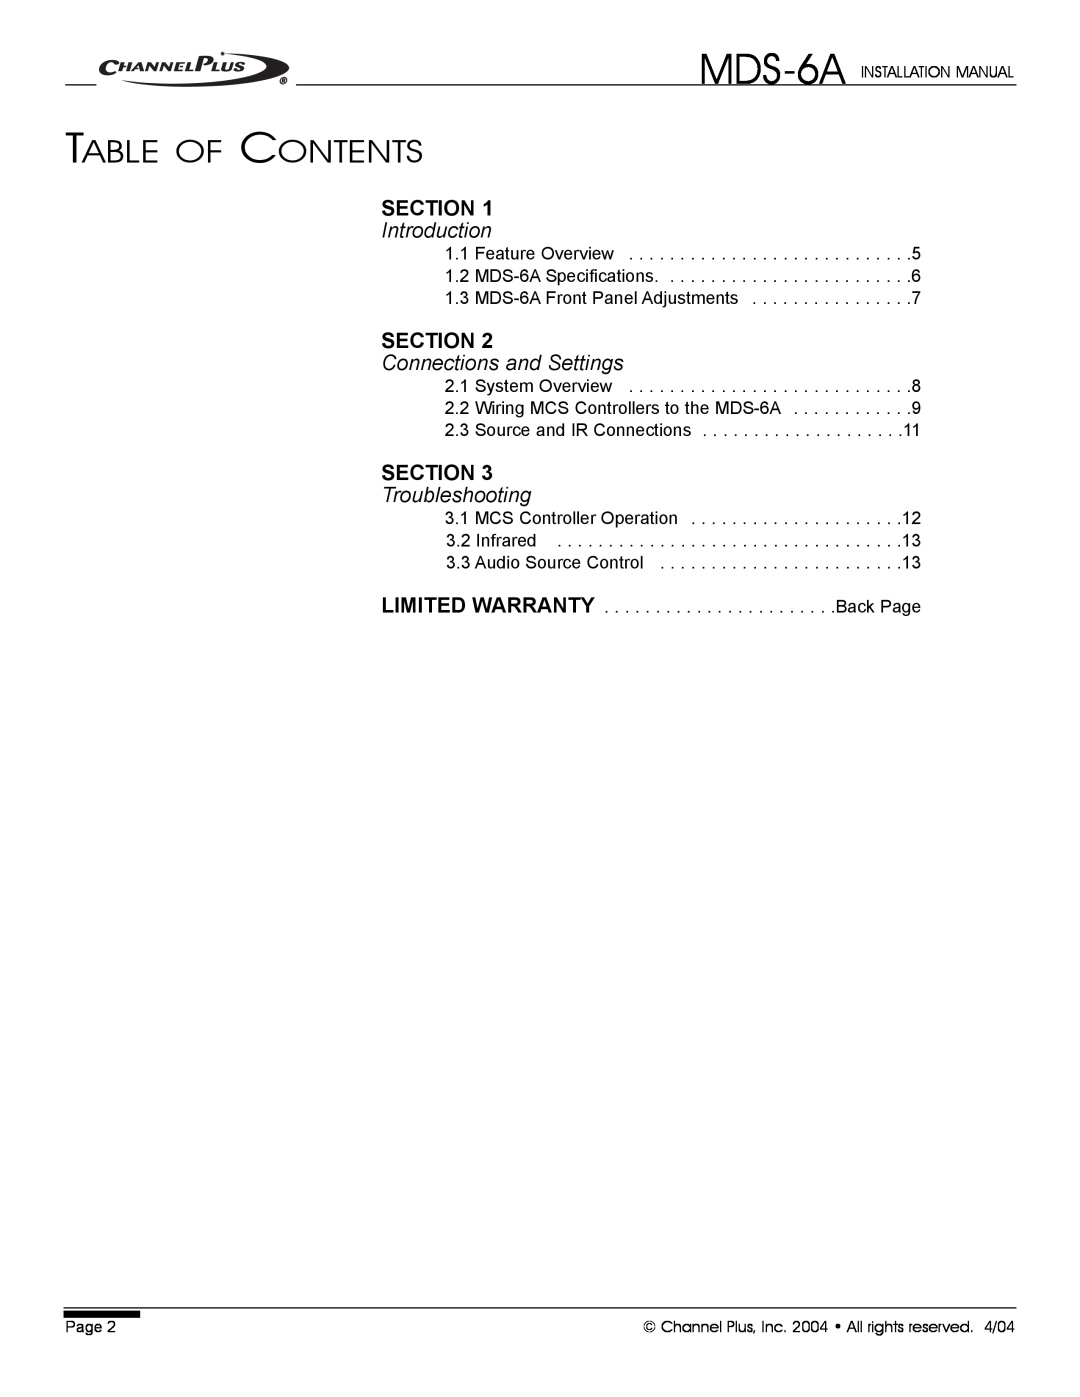 Channel Plus MDS-6A installation manual Table Of Contents, Section, Introduction, Connections and Settings, Troubleshooting 